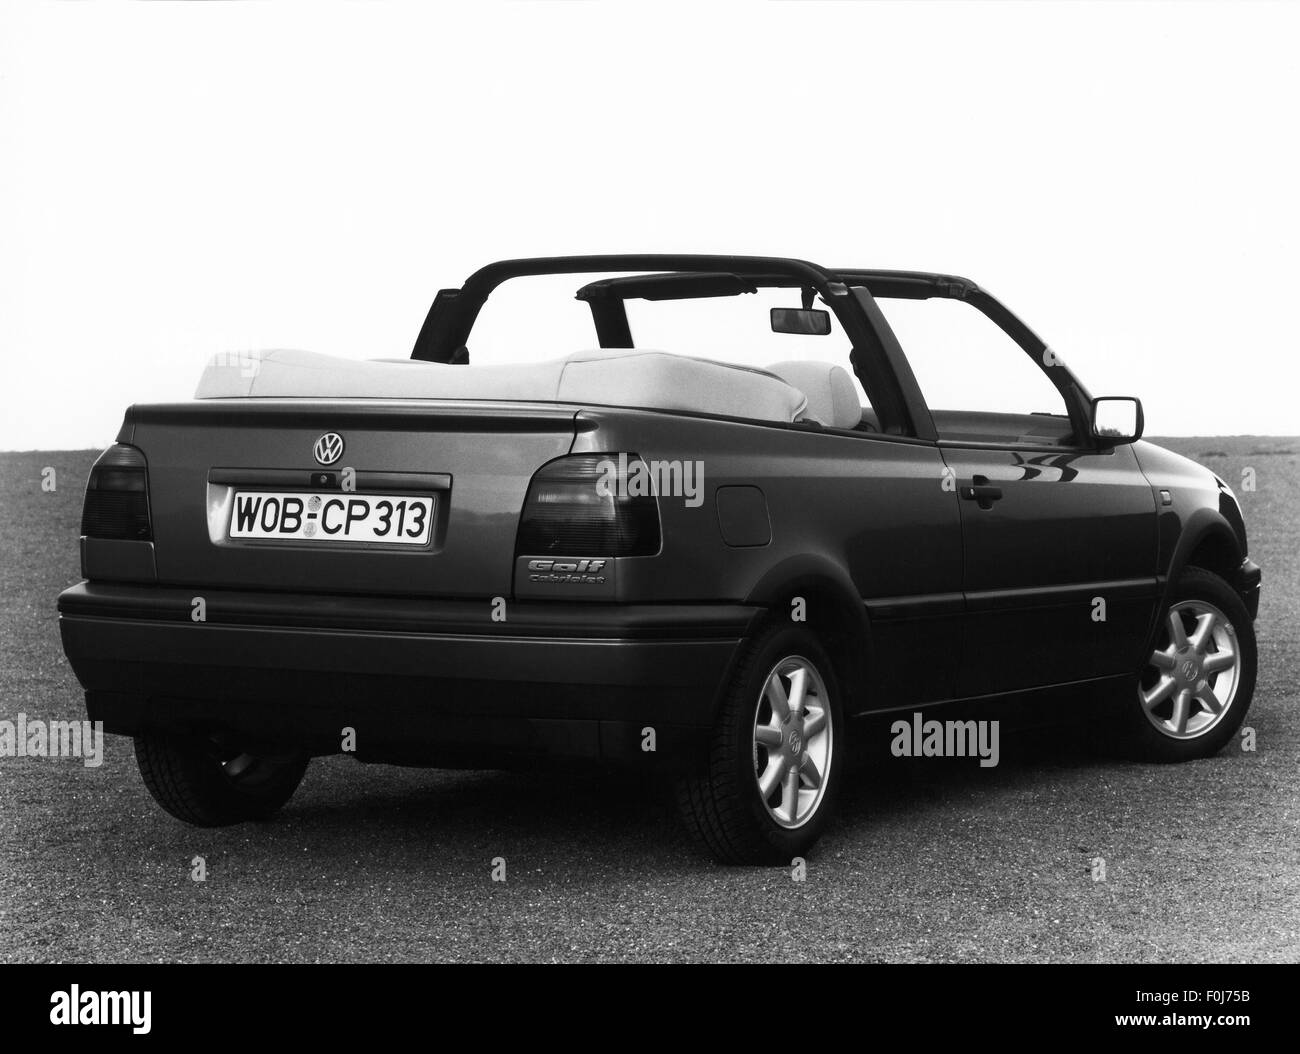 transport / transportation, car, vehicle variants, Volkswagen, VW Golf Mk3 convertible, 1990s, Additional-Rights-Clearences-Not Available Stock Photo